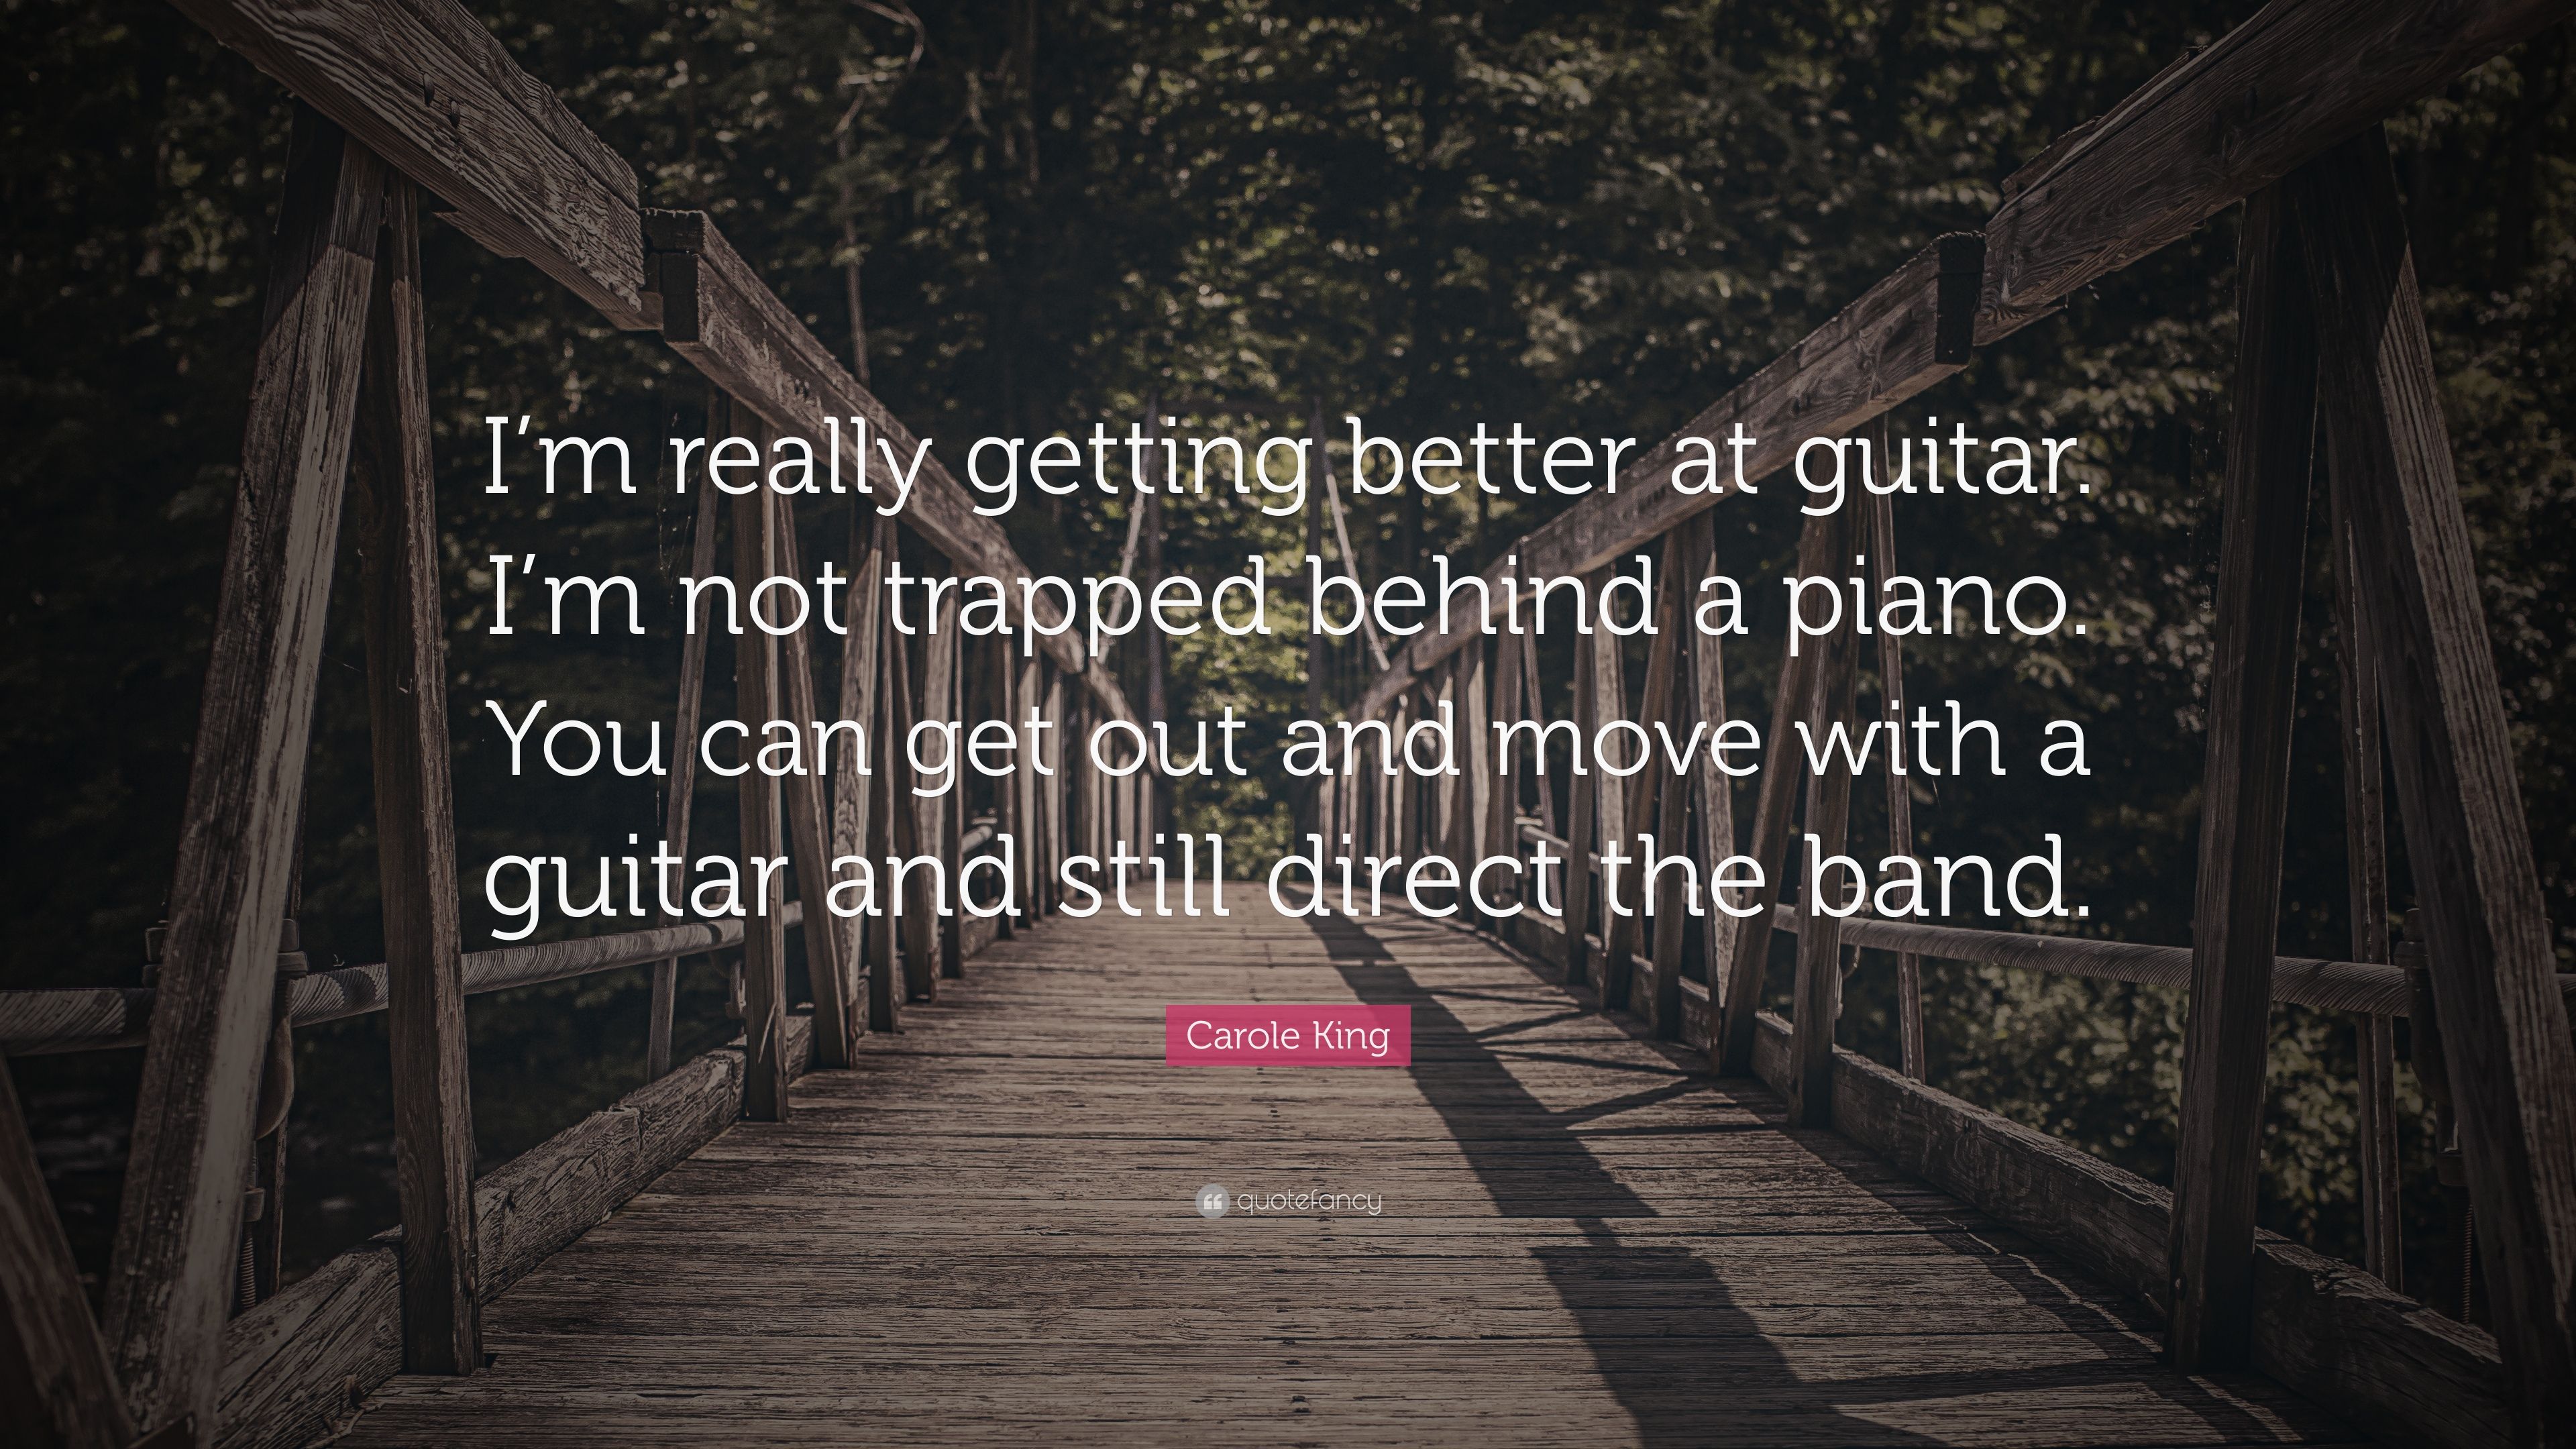 Carole King Quote: “I'm really getting better at guitar. I'm not